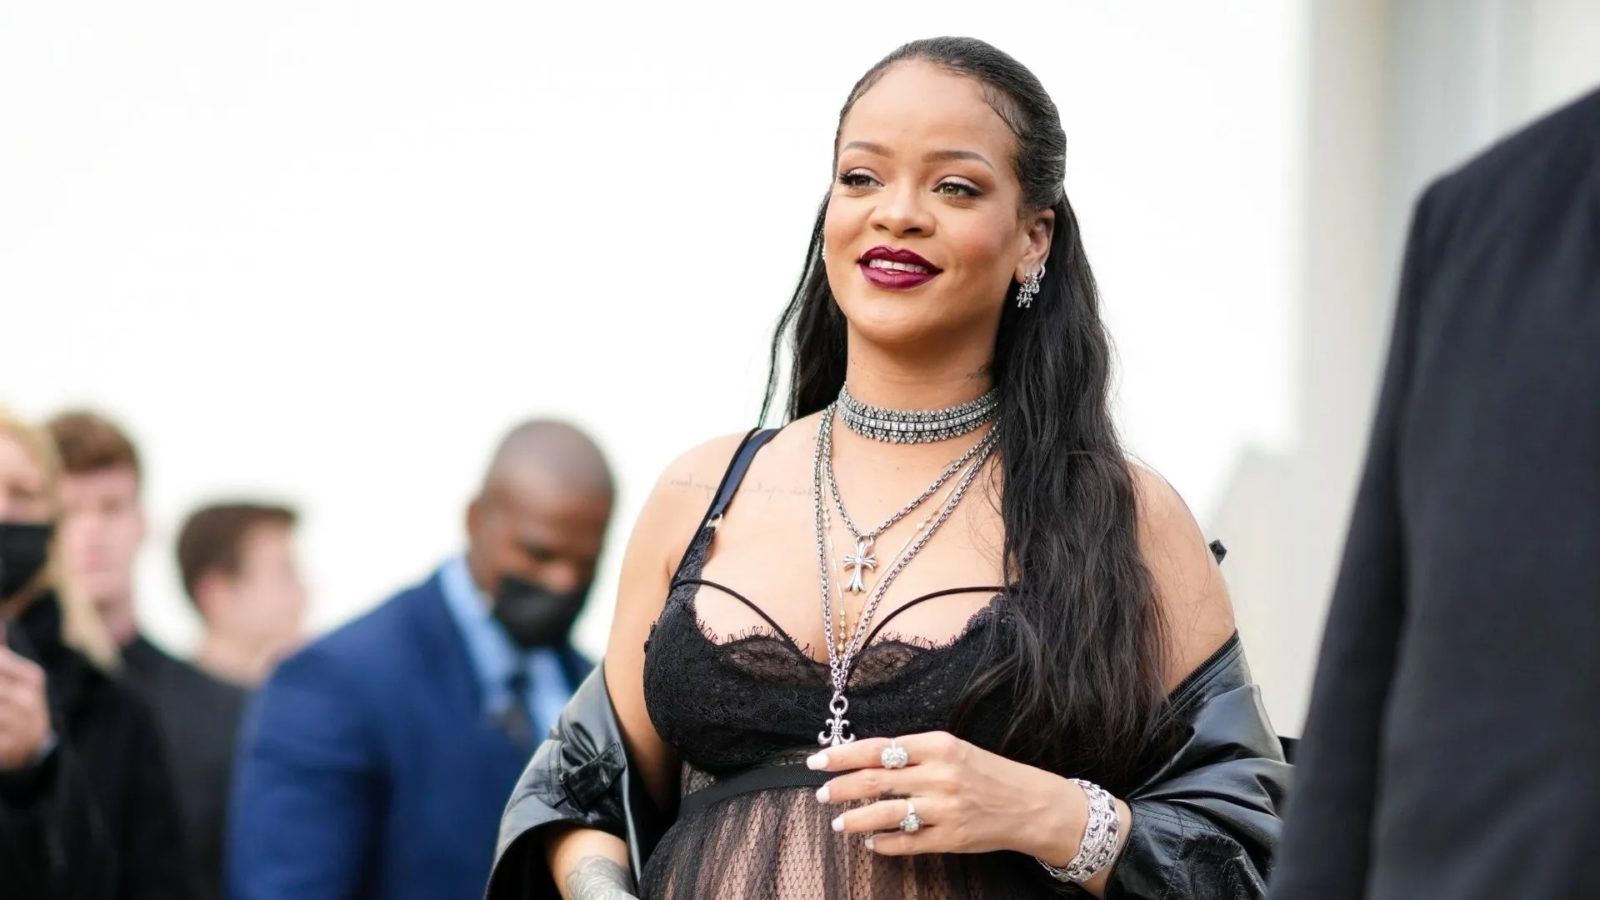 Rihanna becomes youngest self-made billionaire woman in the US